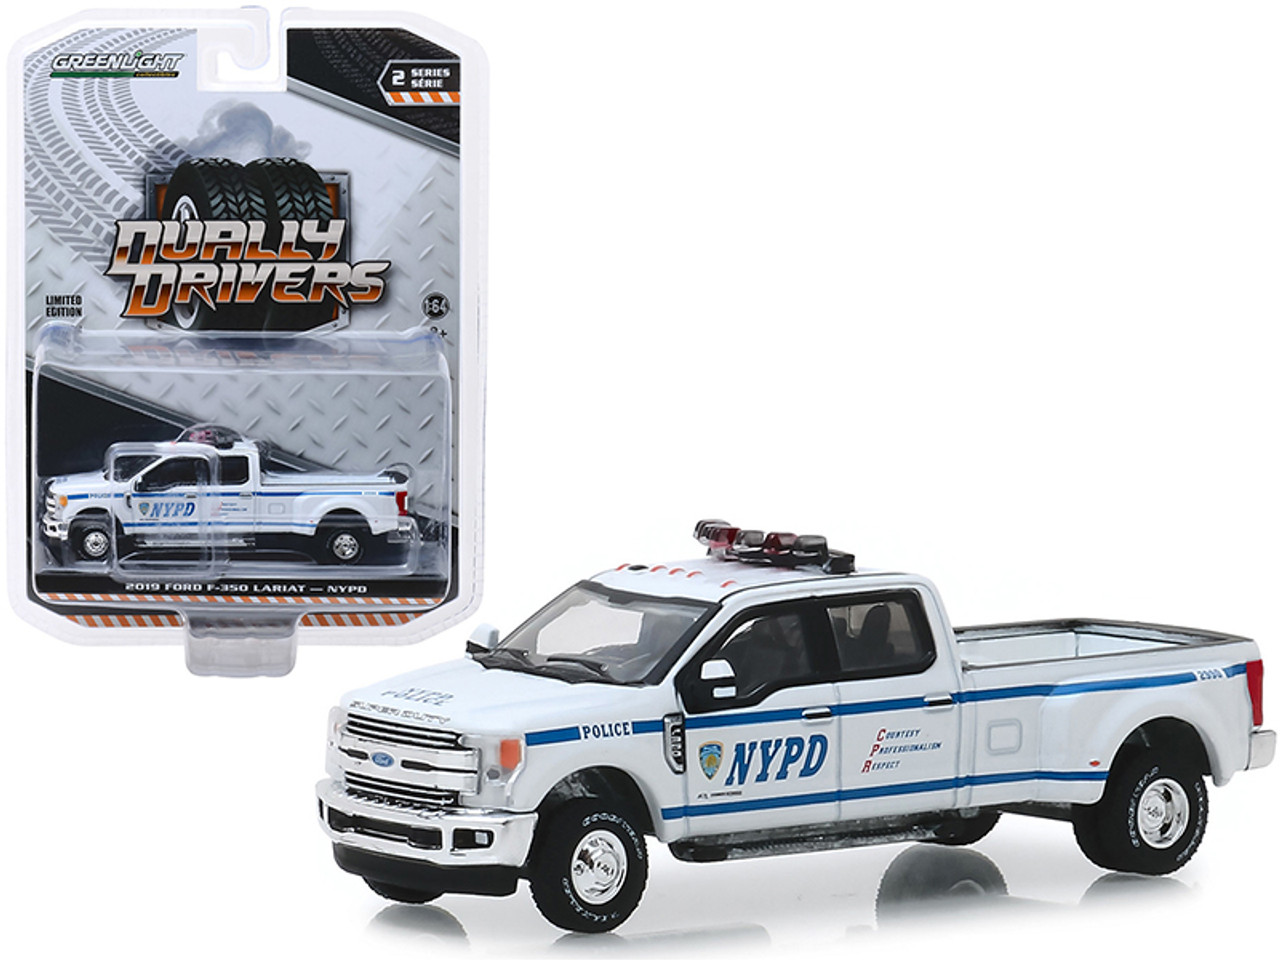 2019 Ford F-350 Lariat Pickup Truck "New York City Police Dept" (NYPD) "Dually Drivers" Series 2 1/64 Diecast Model Car by Greenlight